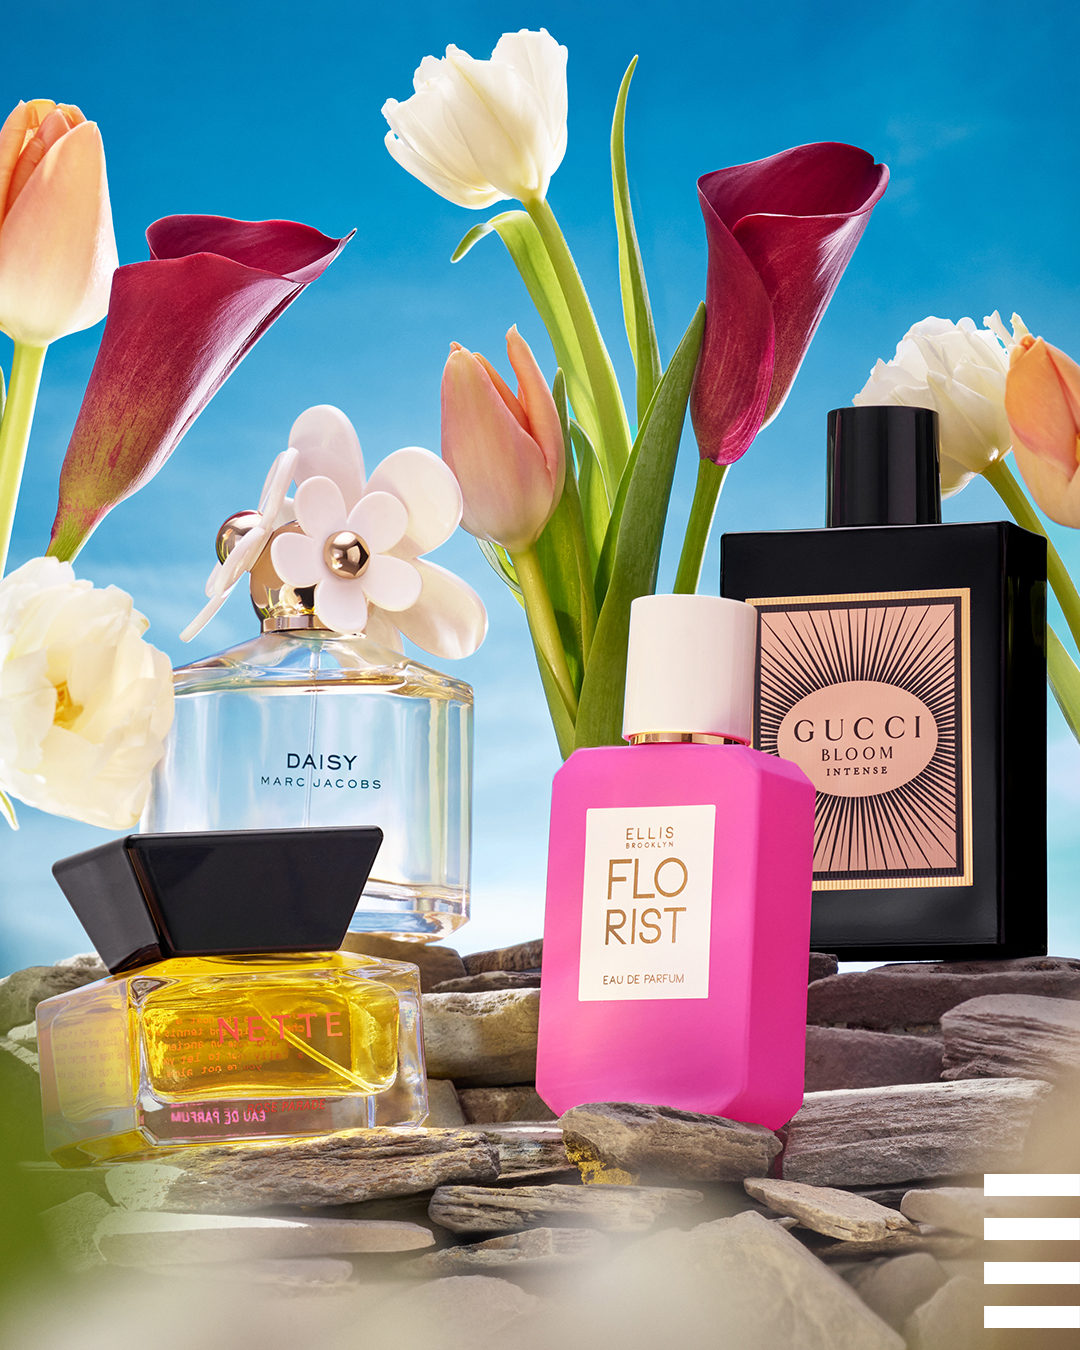 Four perfumes from Sephora are on display in front of beautiful, spring-time flowers.